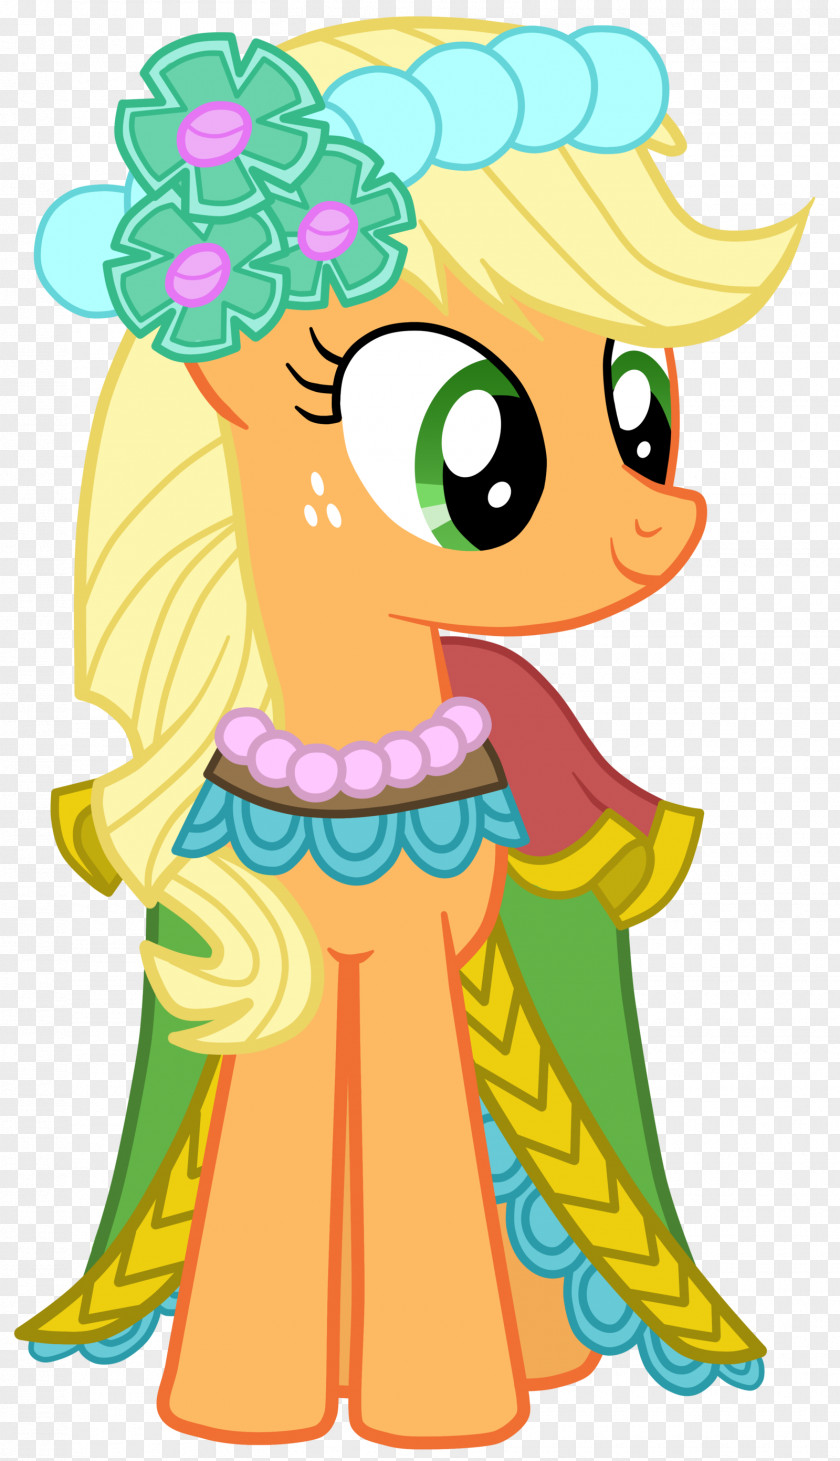 Applejack Equestria Girls In Love Wedding Dress Of Prince Harry And Meghan Markle PNG